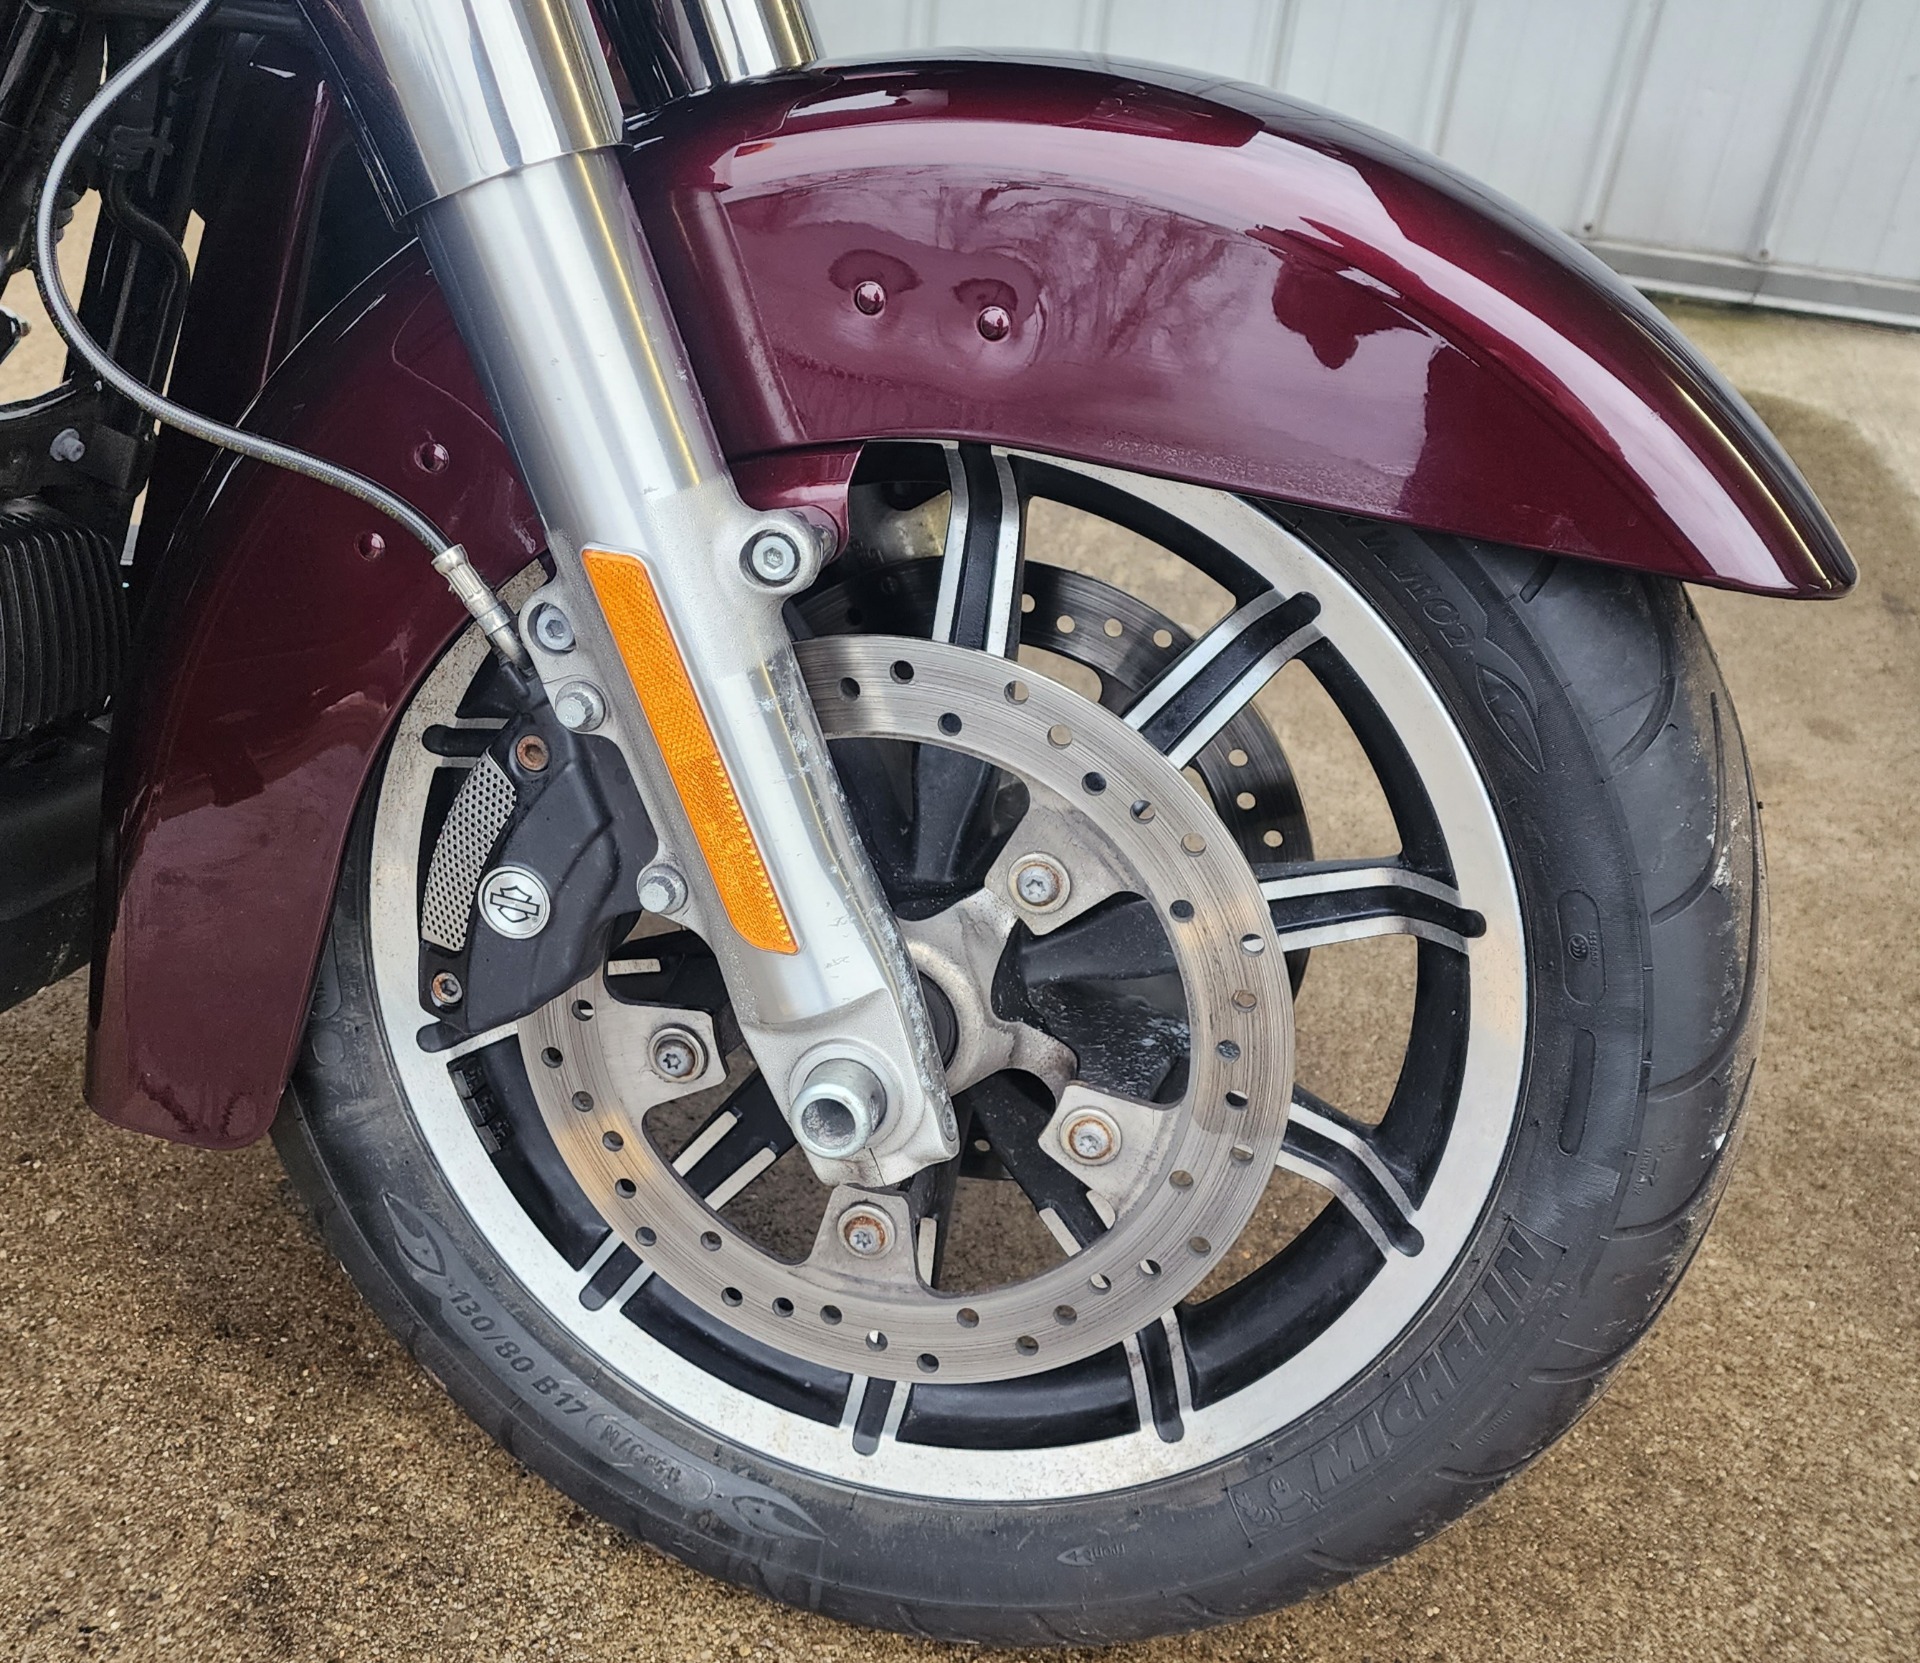 2019 Harley-Davidson Road Glide® Ultra in Athens, Ohio - Photo 9